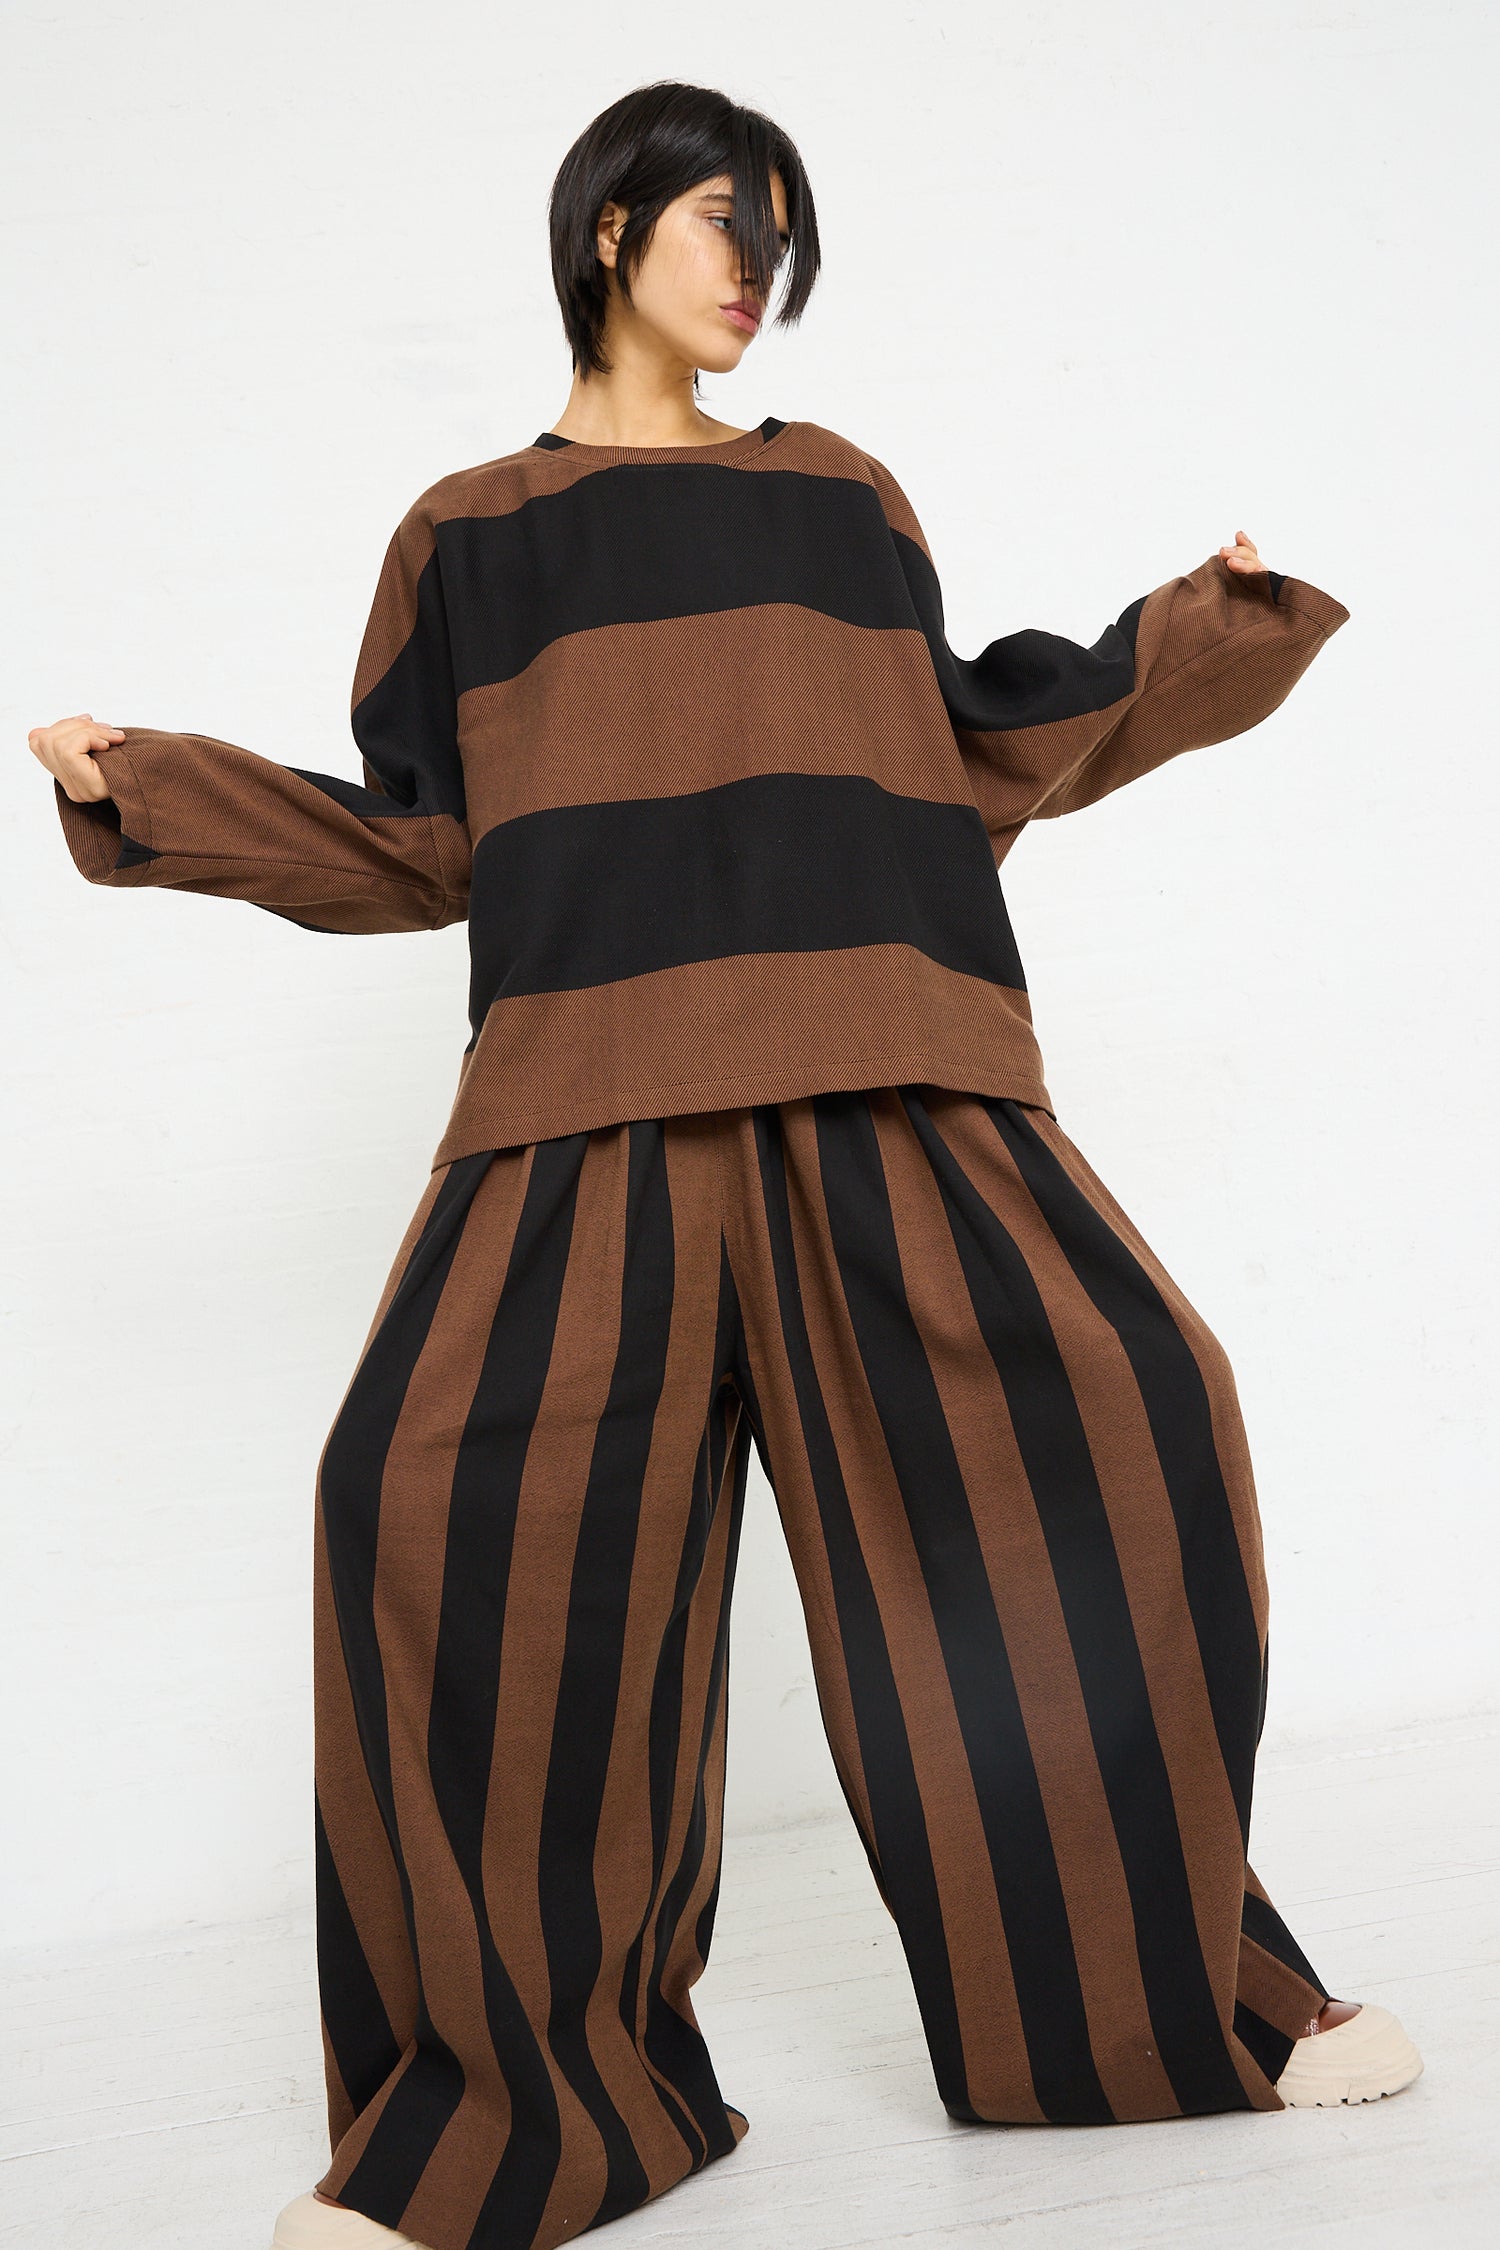 A woman stands against a white background, posing in a loose-fitting, black and brown striped ensemble featuring the Drawstring Pleated Pant in Black and Brown Stripe by Marrakshi Life.